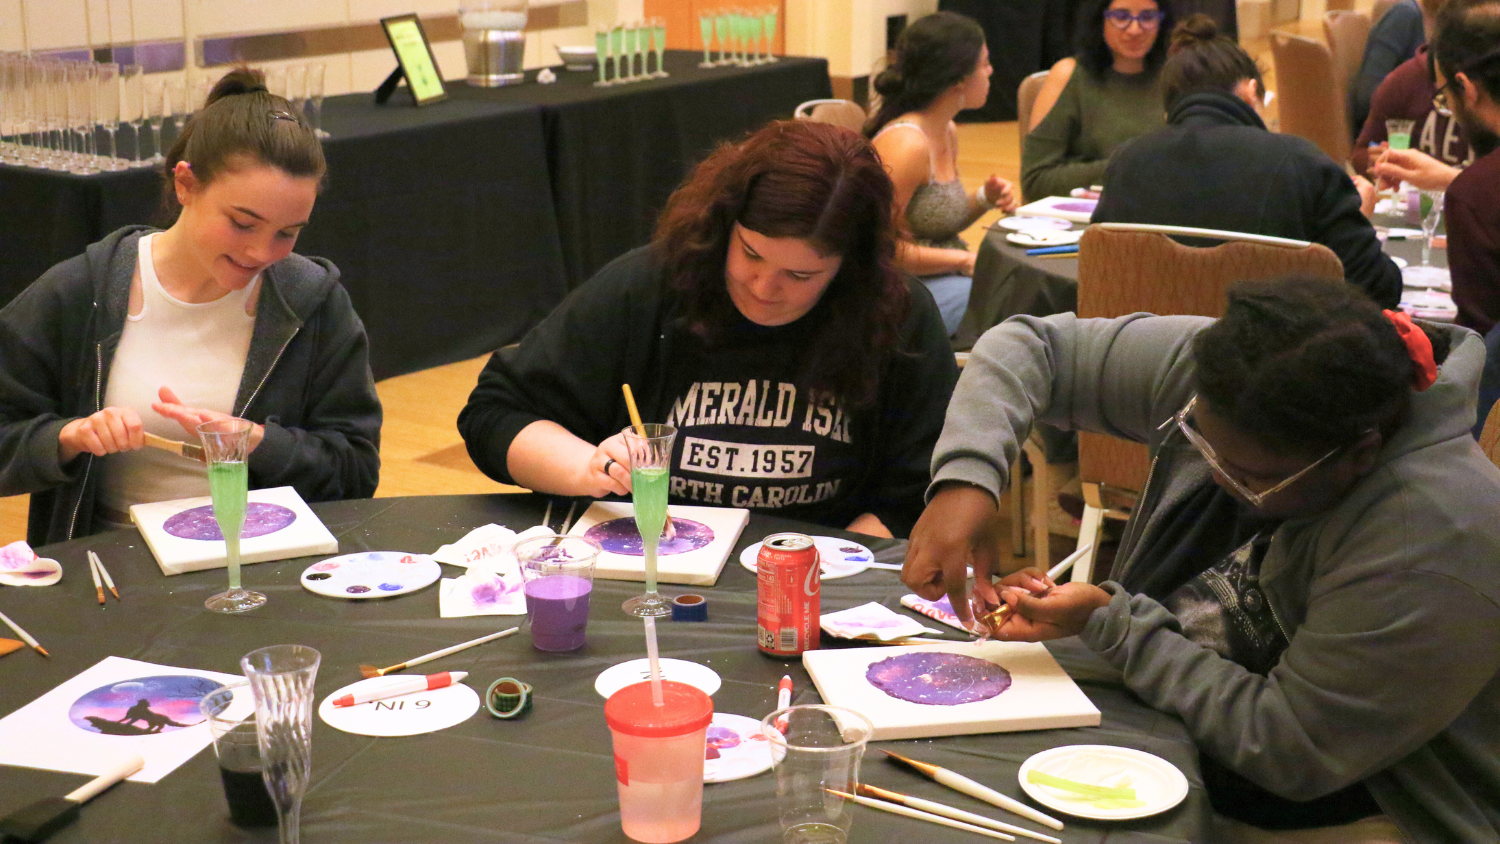 Students painting at a Whine and Design event